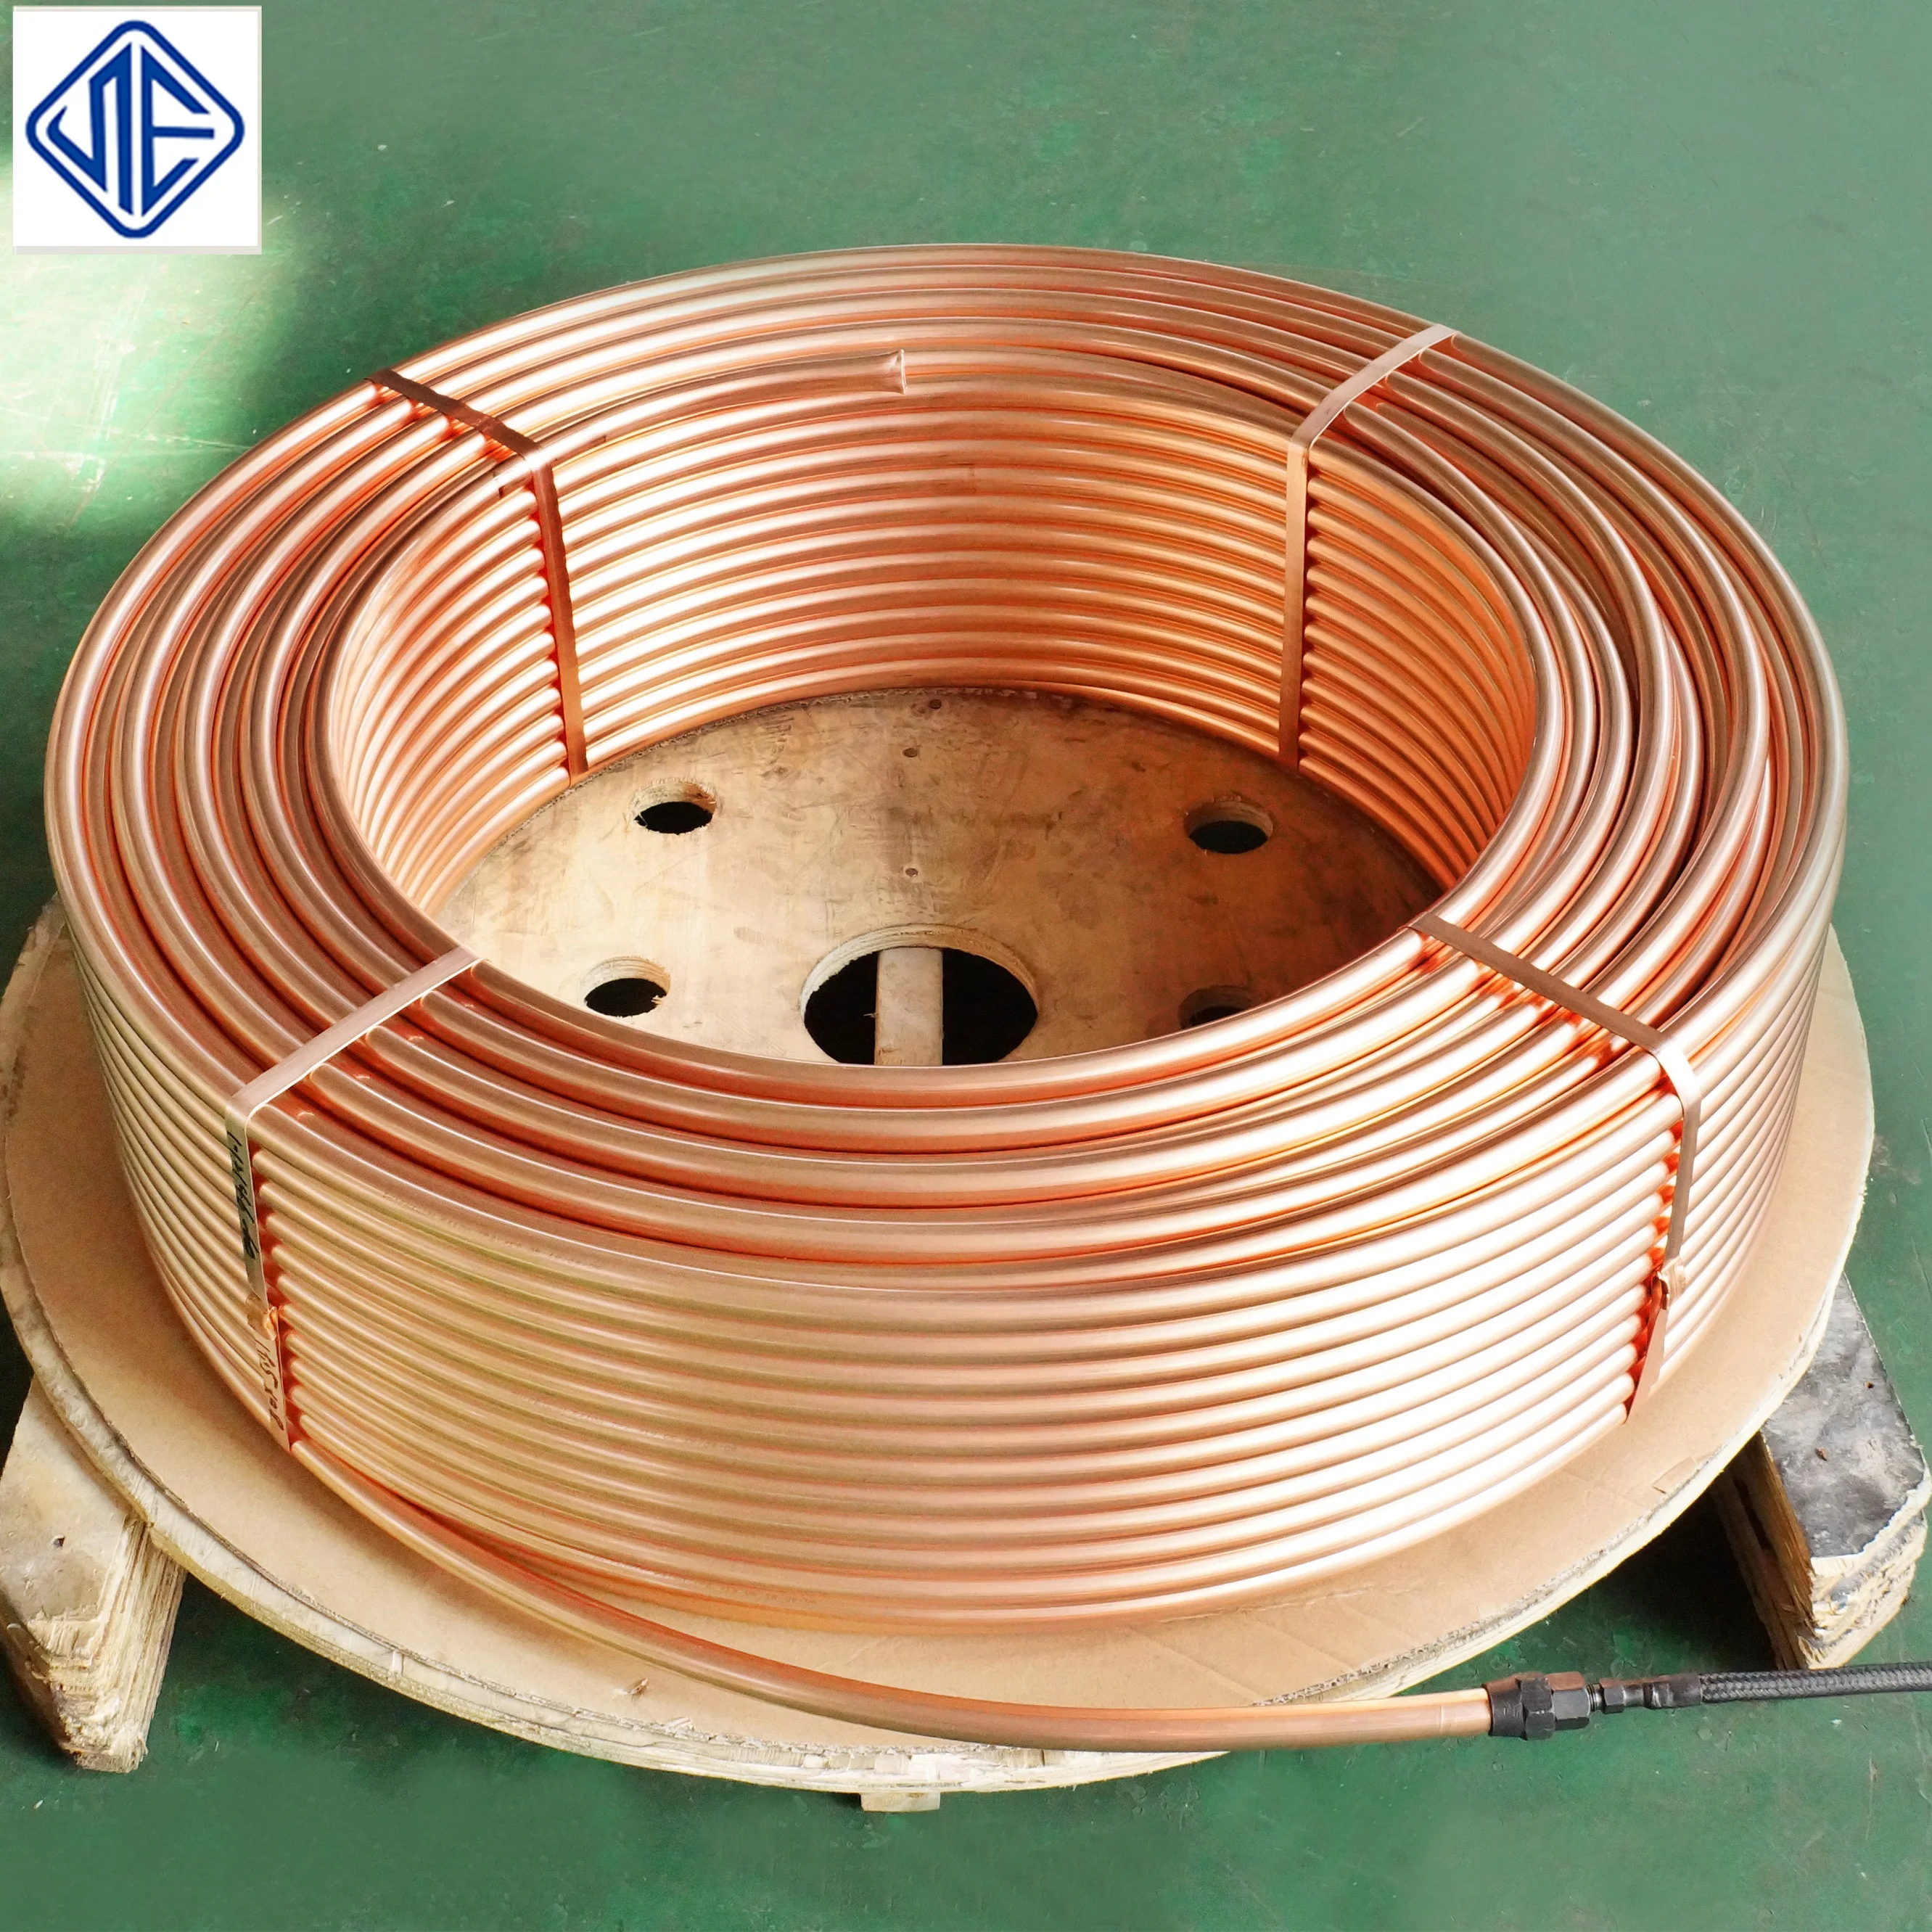 9 52mm Copper Tube For Air Conditioner 3 8 Inch A C Copper Pipe Buy Copper Tube For Air Conditioner Ac Copper Pipe 3 8 Copper Pipe Product On Alibaba Com